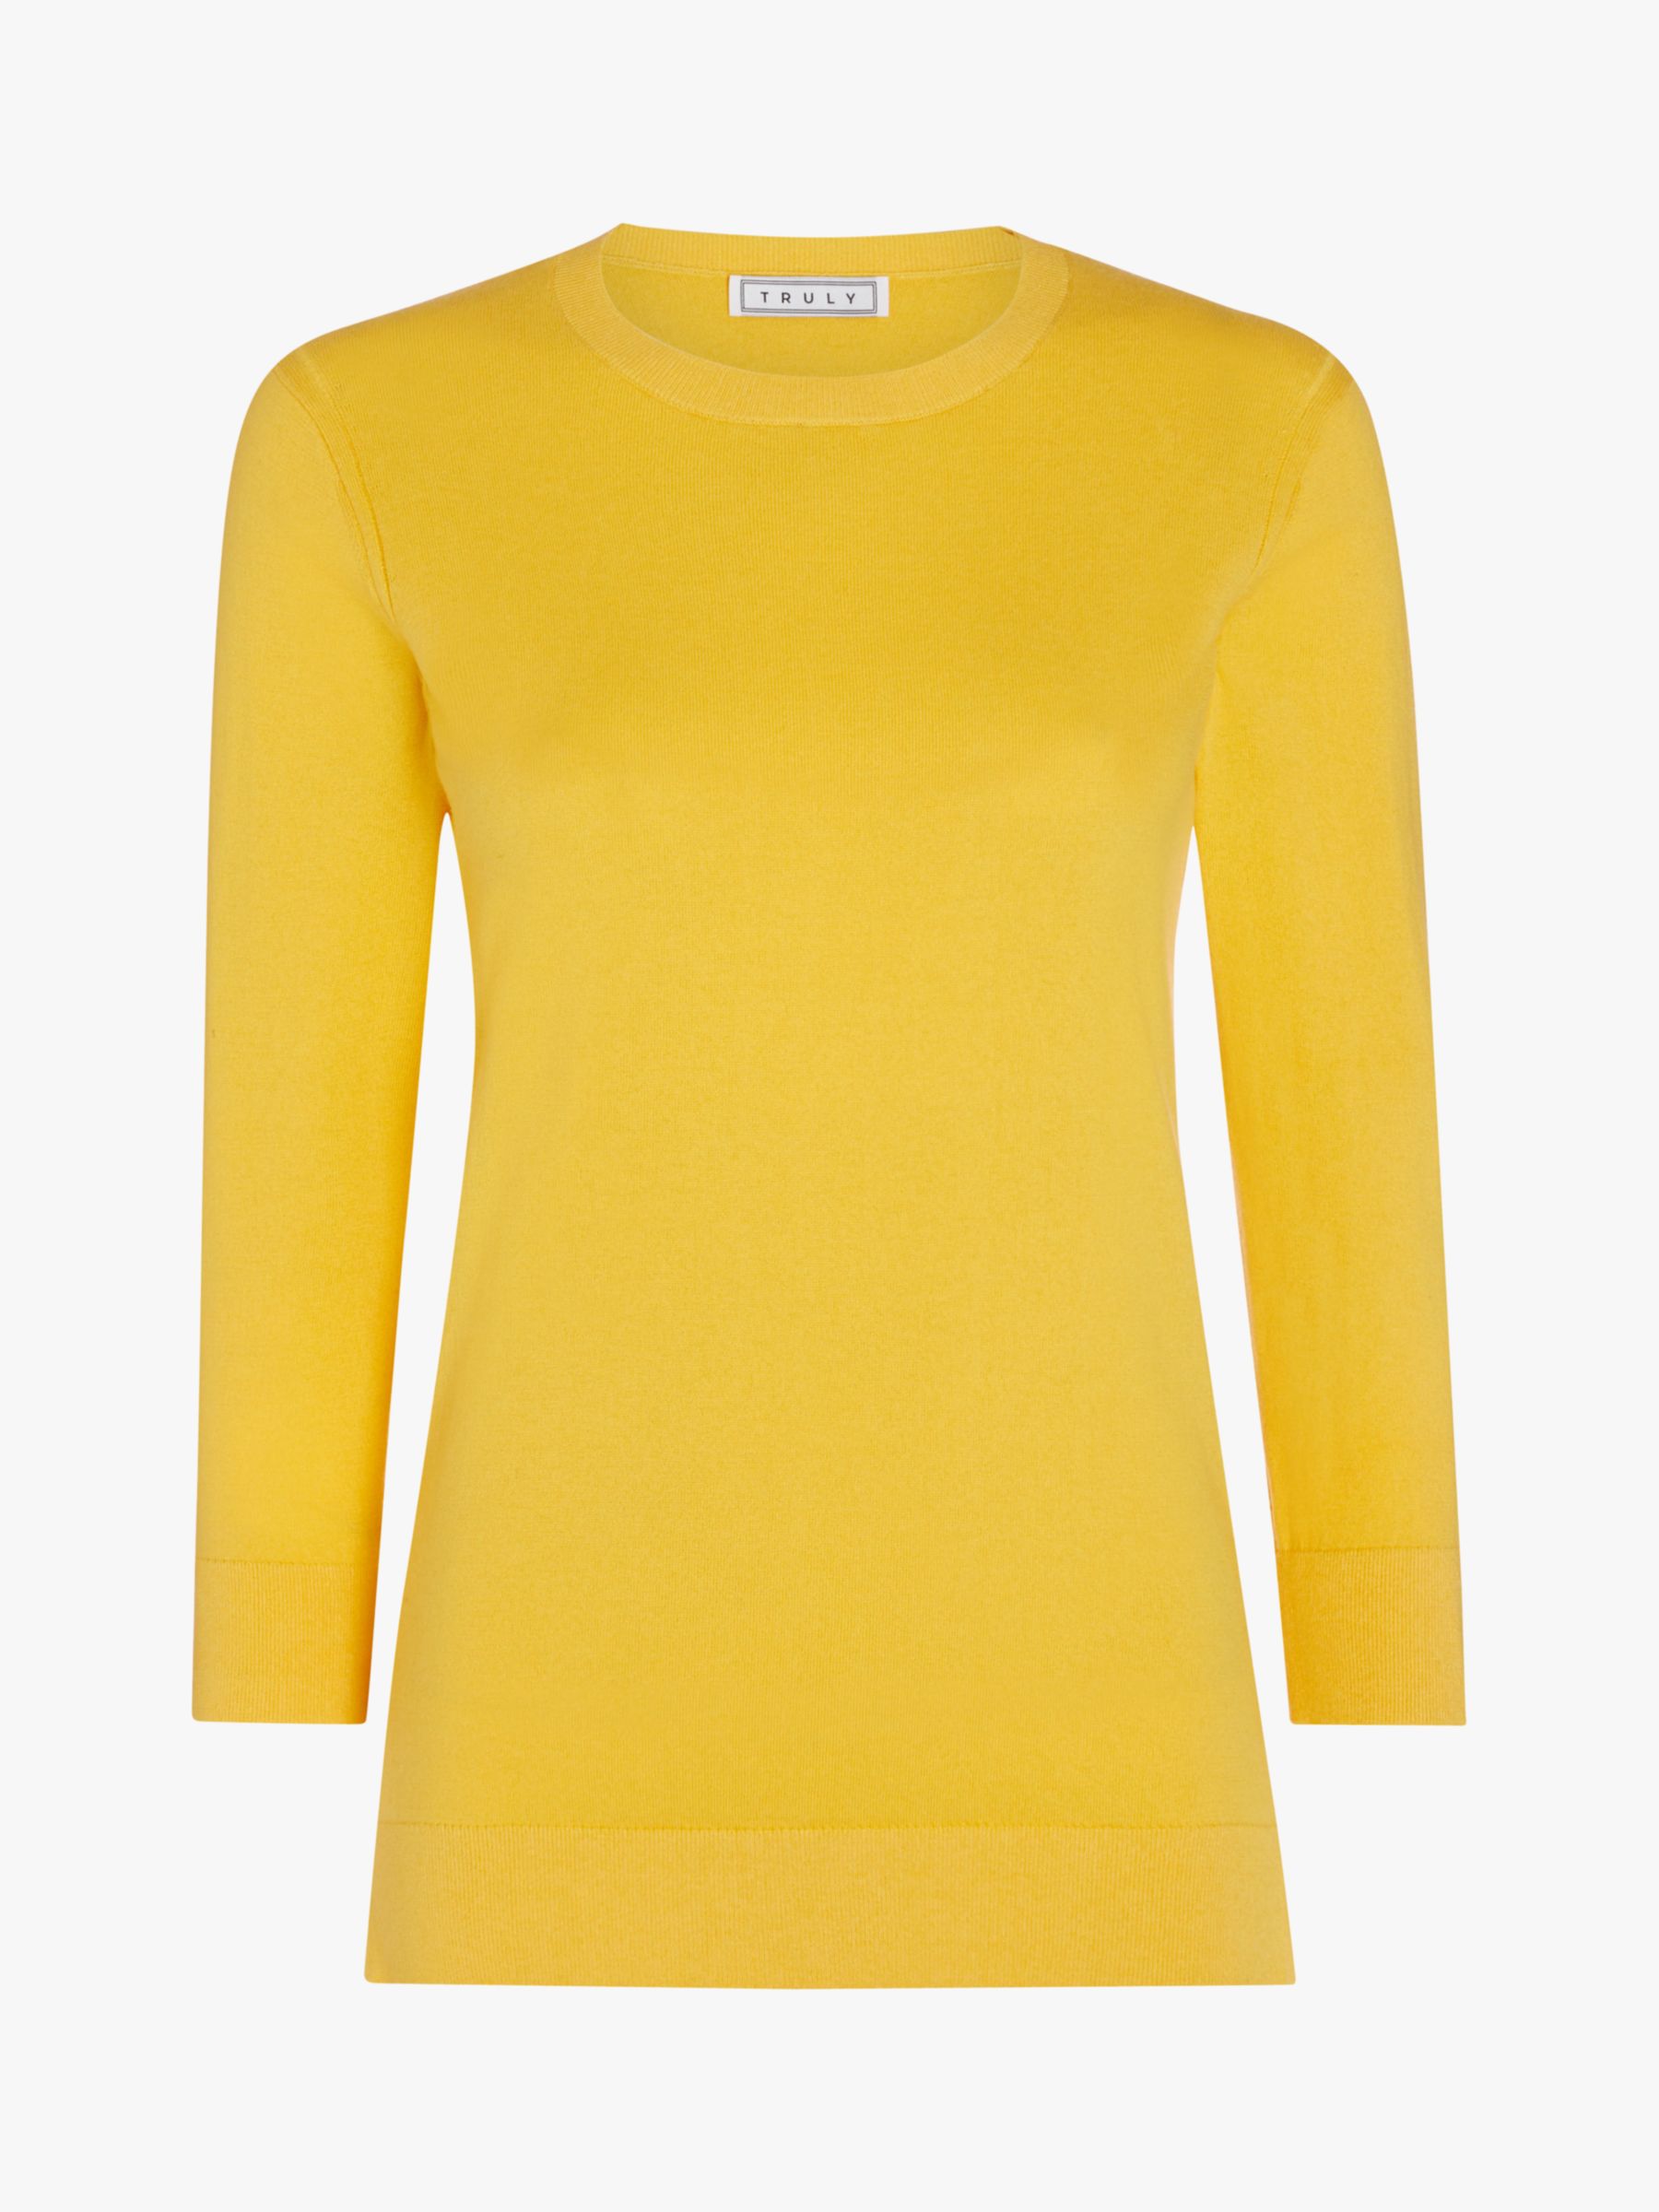 Buy Truly Fine Knit Jumper, Mimosa Online at johnlewis.com